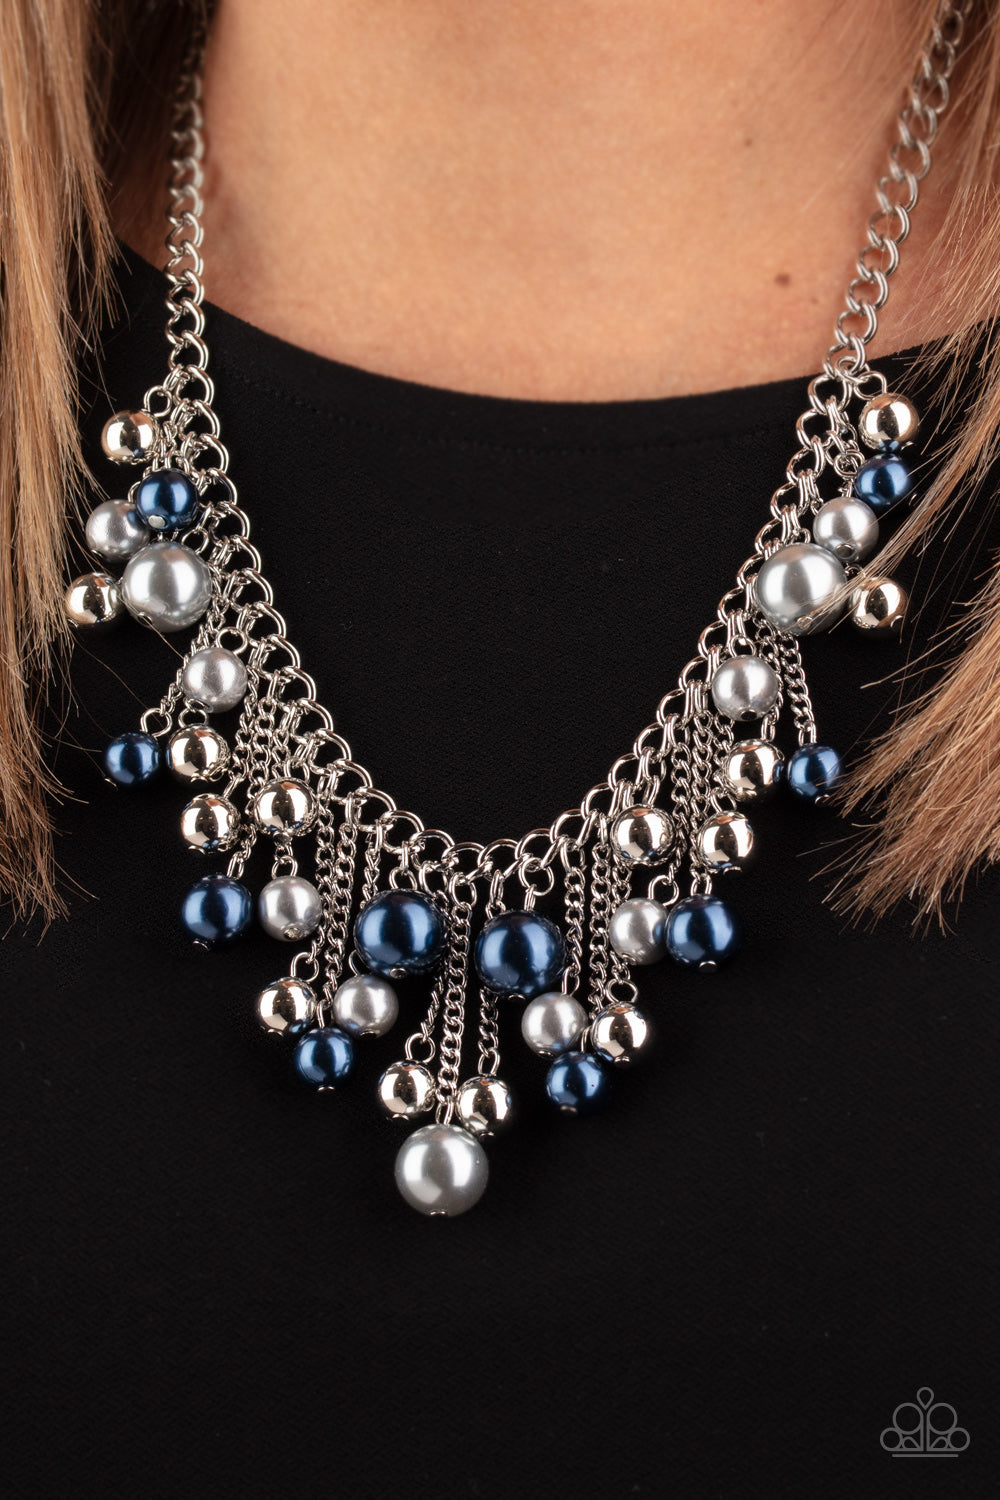 City Celebrity Multi Necklace - Paparazzi Accessories  Attached to silver chains, a bubbly collection of blue and gray pearls and shiny silver beads cascade from a thick silver chain, creating a flirtatious fringe below the collar. Features an adjustable clasp closure.   All Paparazzi Accessories are lead free and nickel free!  Sold as one individual necklace. Includes one pair of matching earrings.